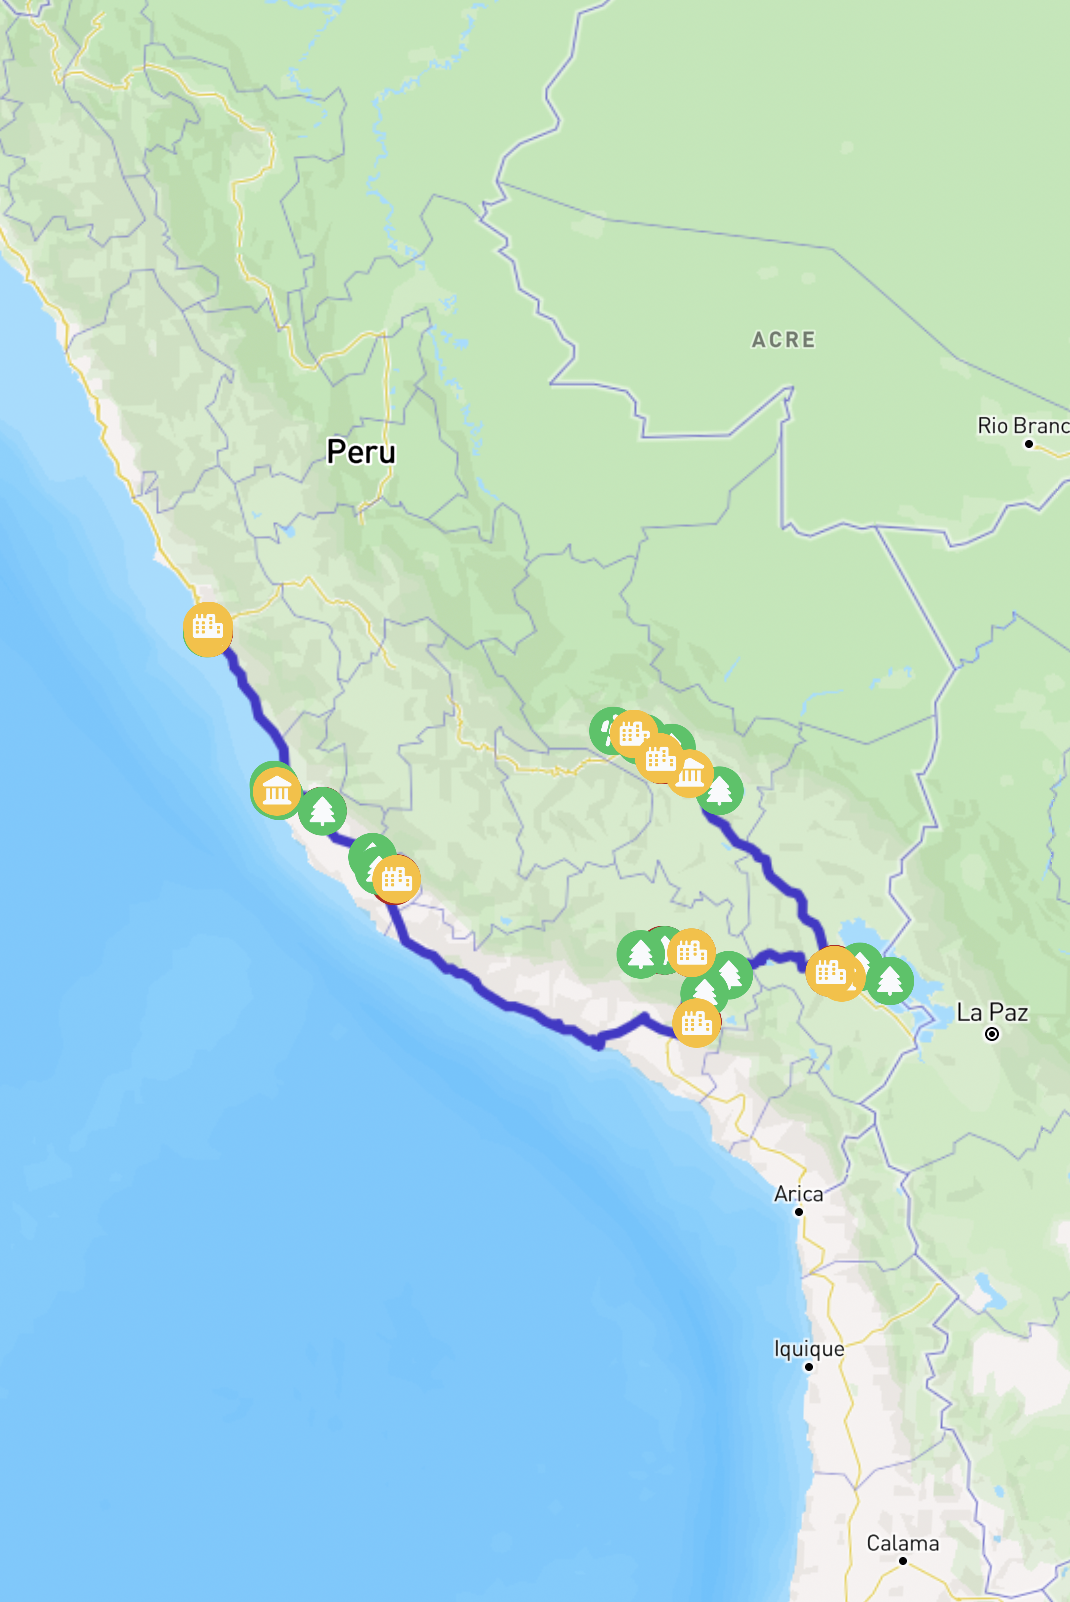 A map showing the route across Peru.